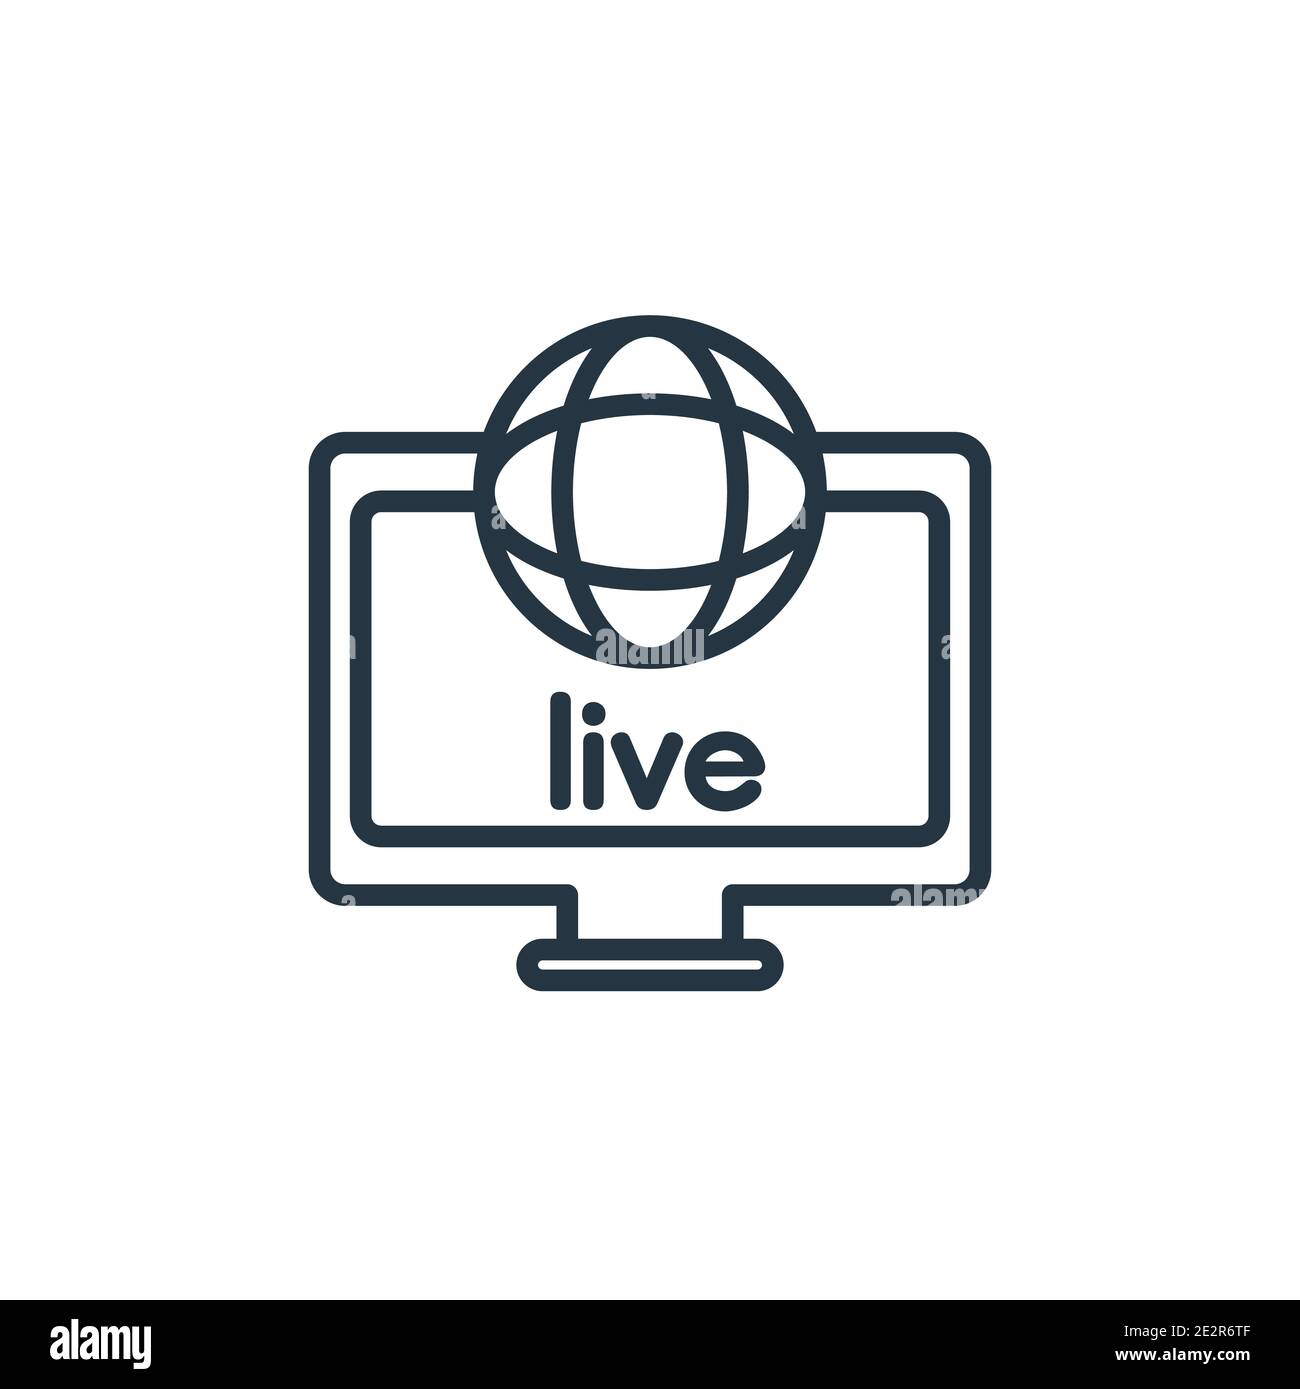 https://c8.alamy.com/comp/2E2R6TF/live-news-report-outline-vector-icon-thin-line-black-live-news-report-icon-flat-vector-simple-element-illustration-from-editable-communications-conc-2E2R6TF.jpg